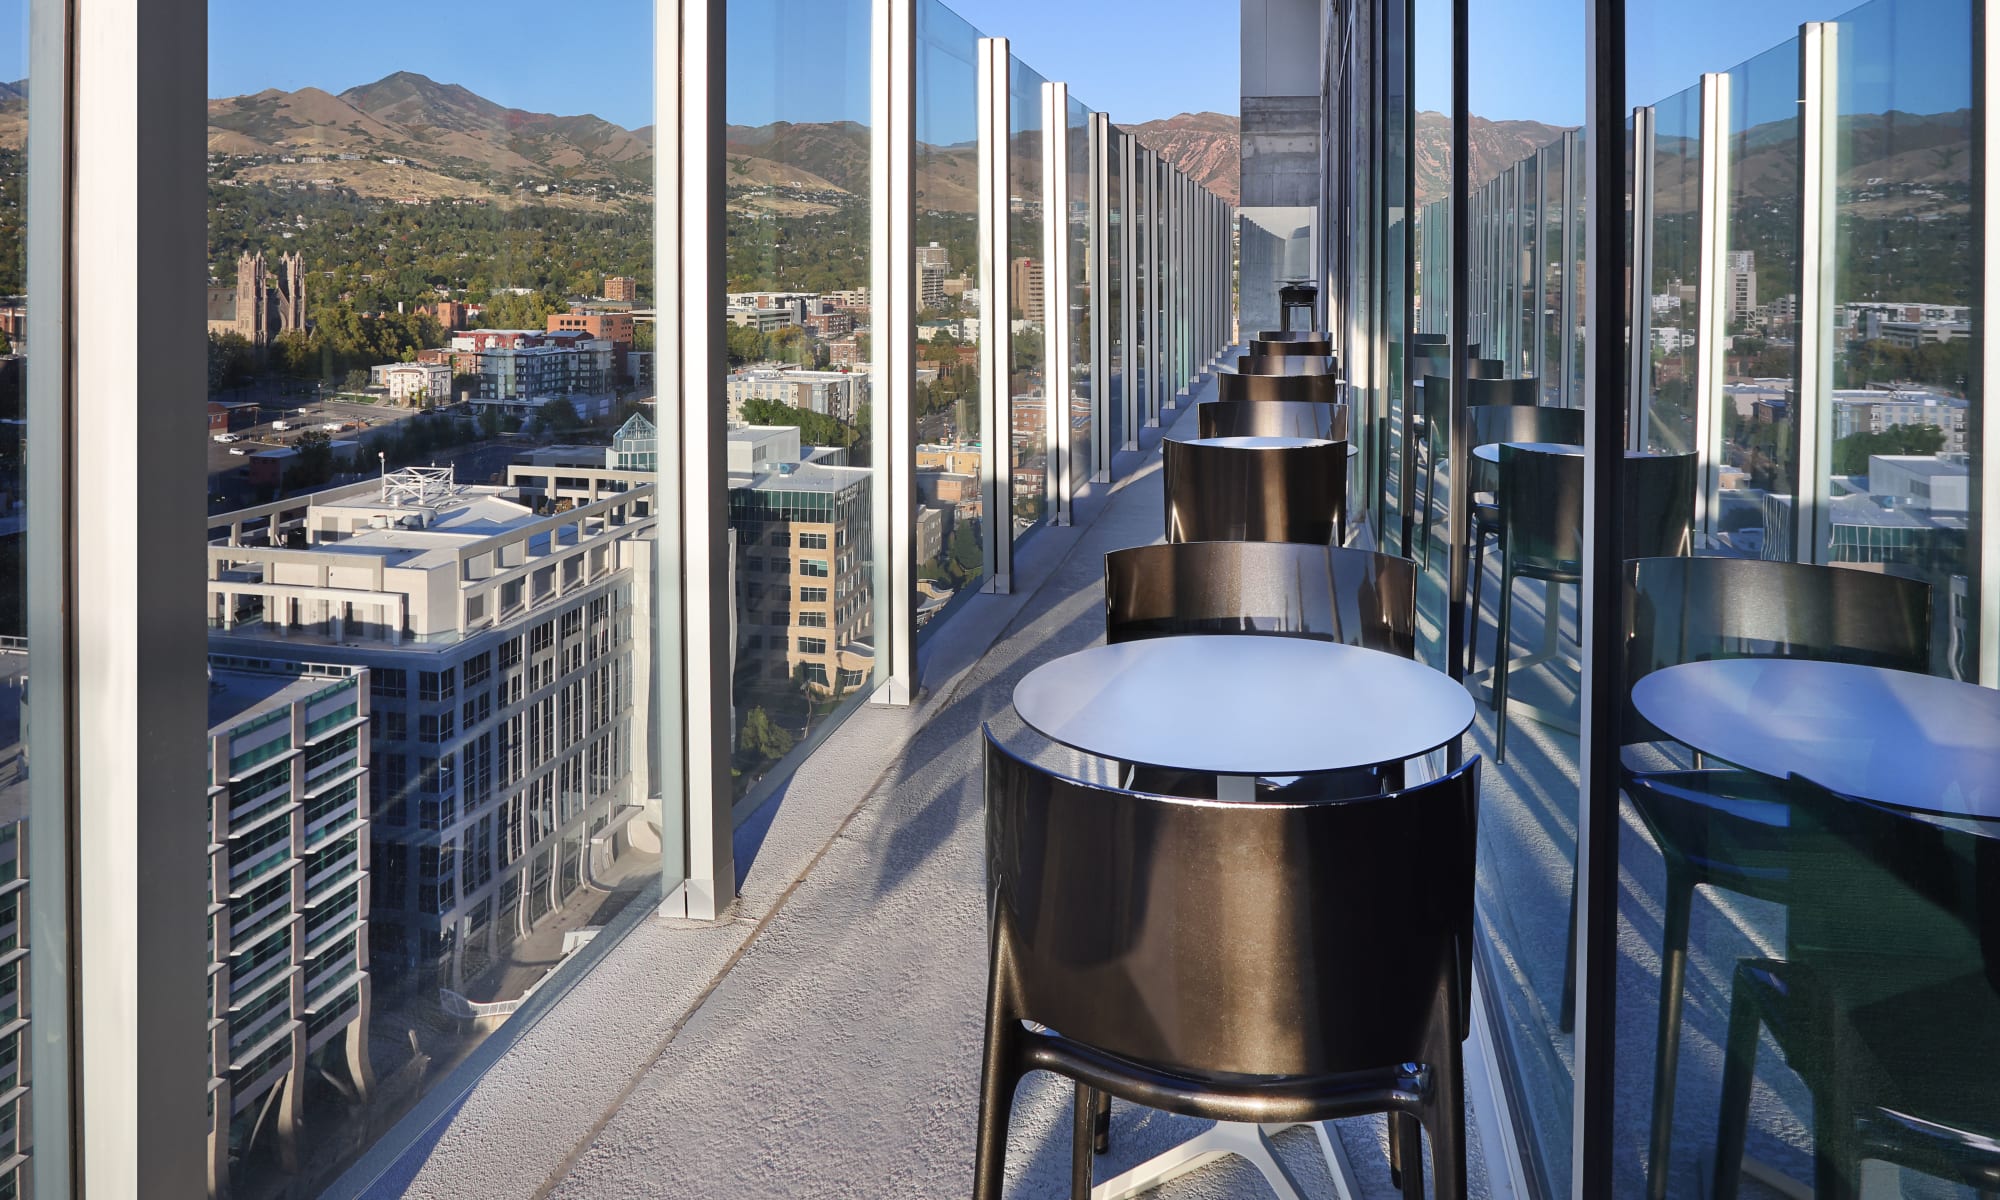 Stools and tables with a mountain and city view at Luxury high-rise community of Liberty SKY in Salt Lake City, Utah